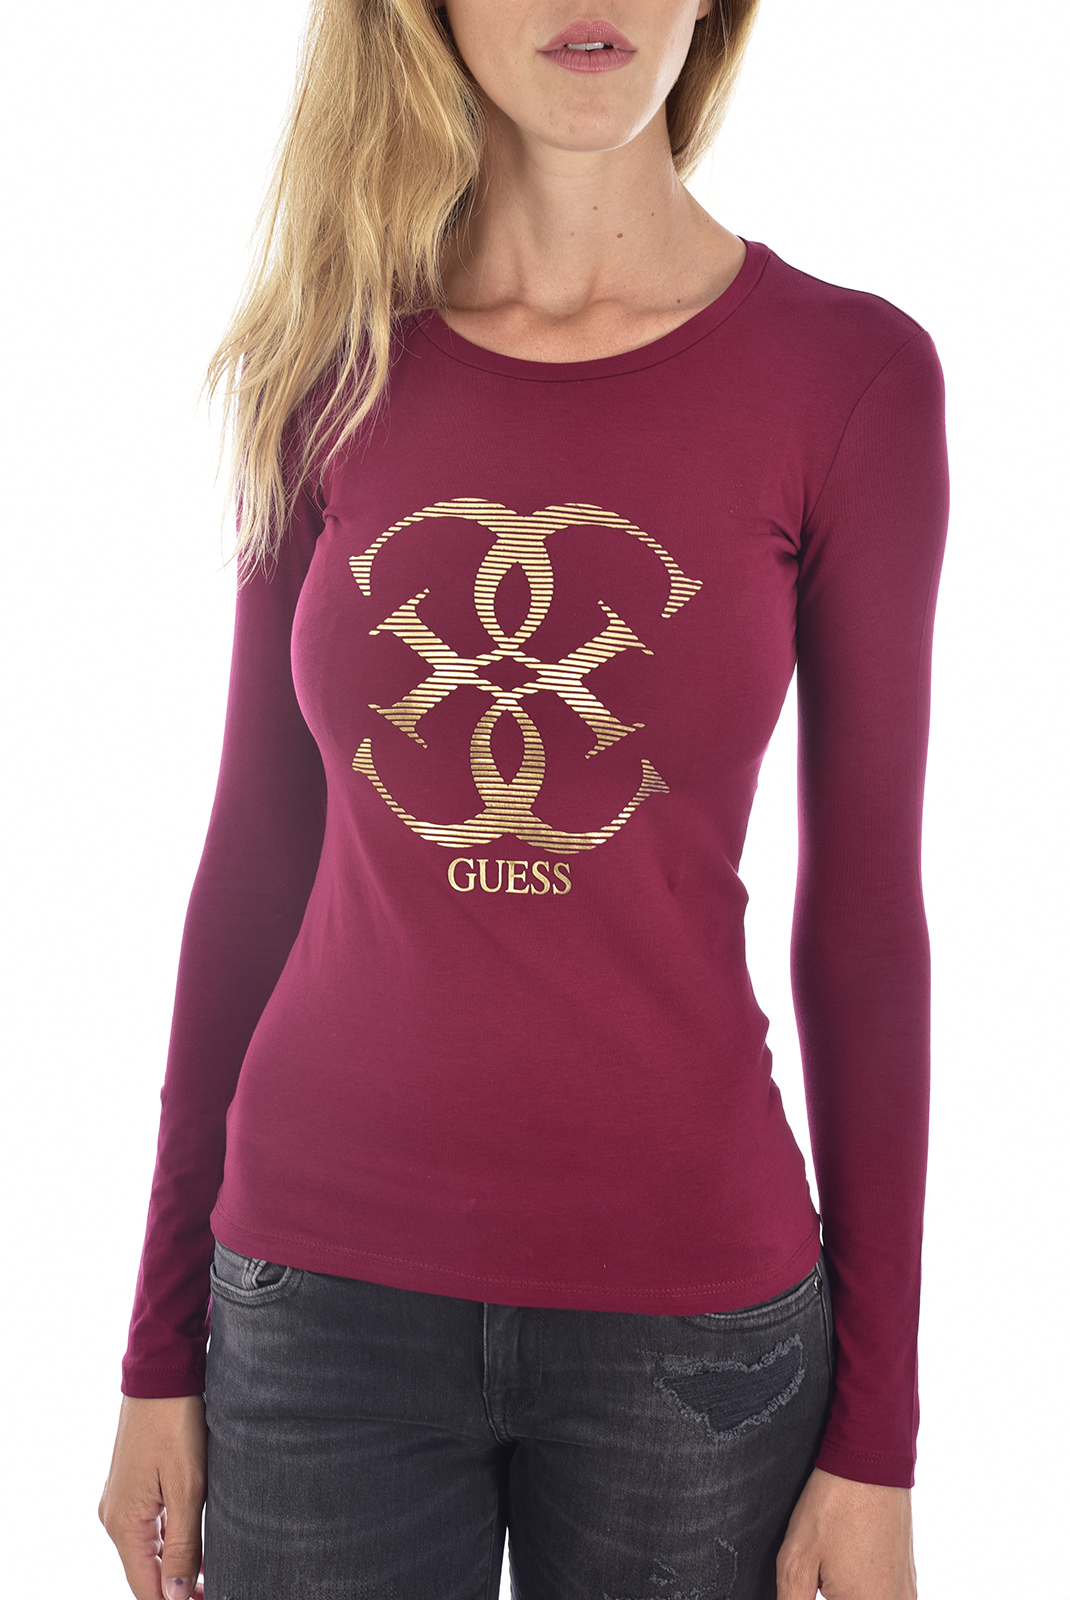 Tee-shirt rouge femme à manches longues Guess - W94i95